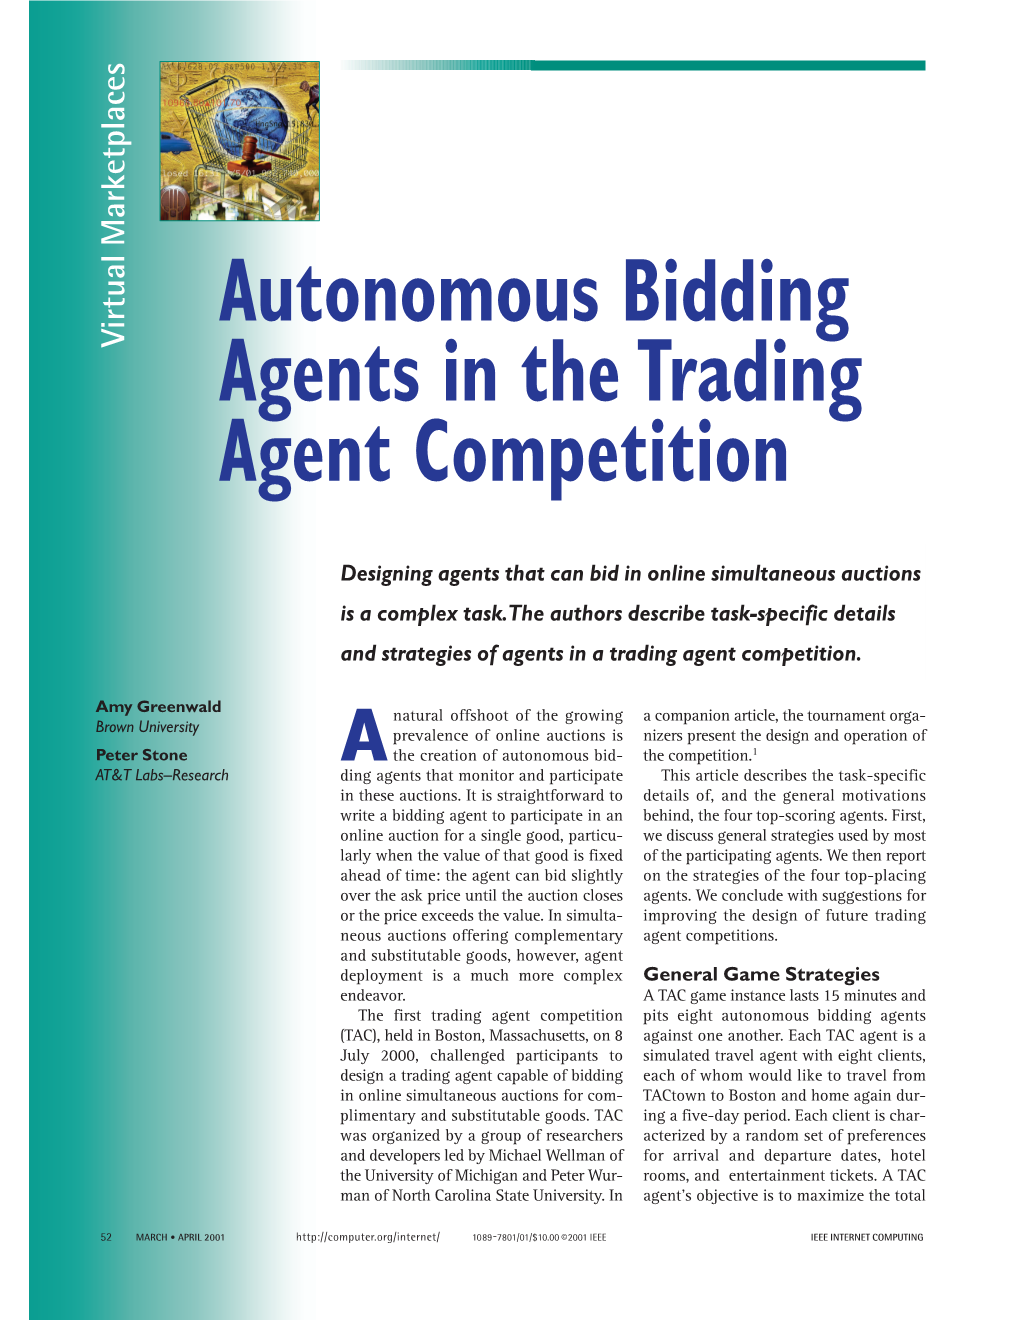 Autonomous Bidding Agents in the Trading Agents Competition